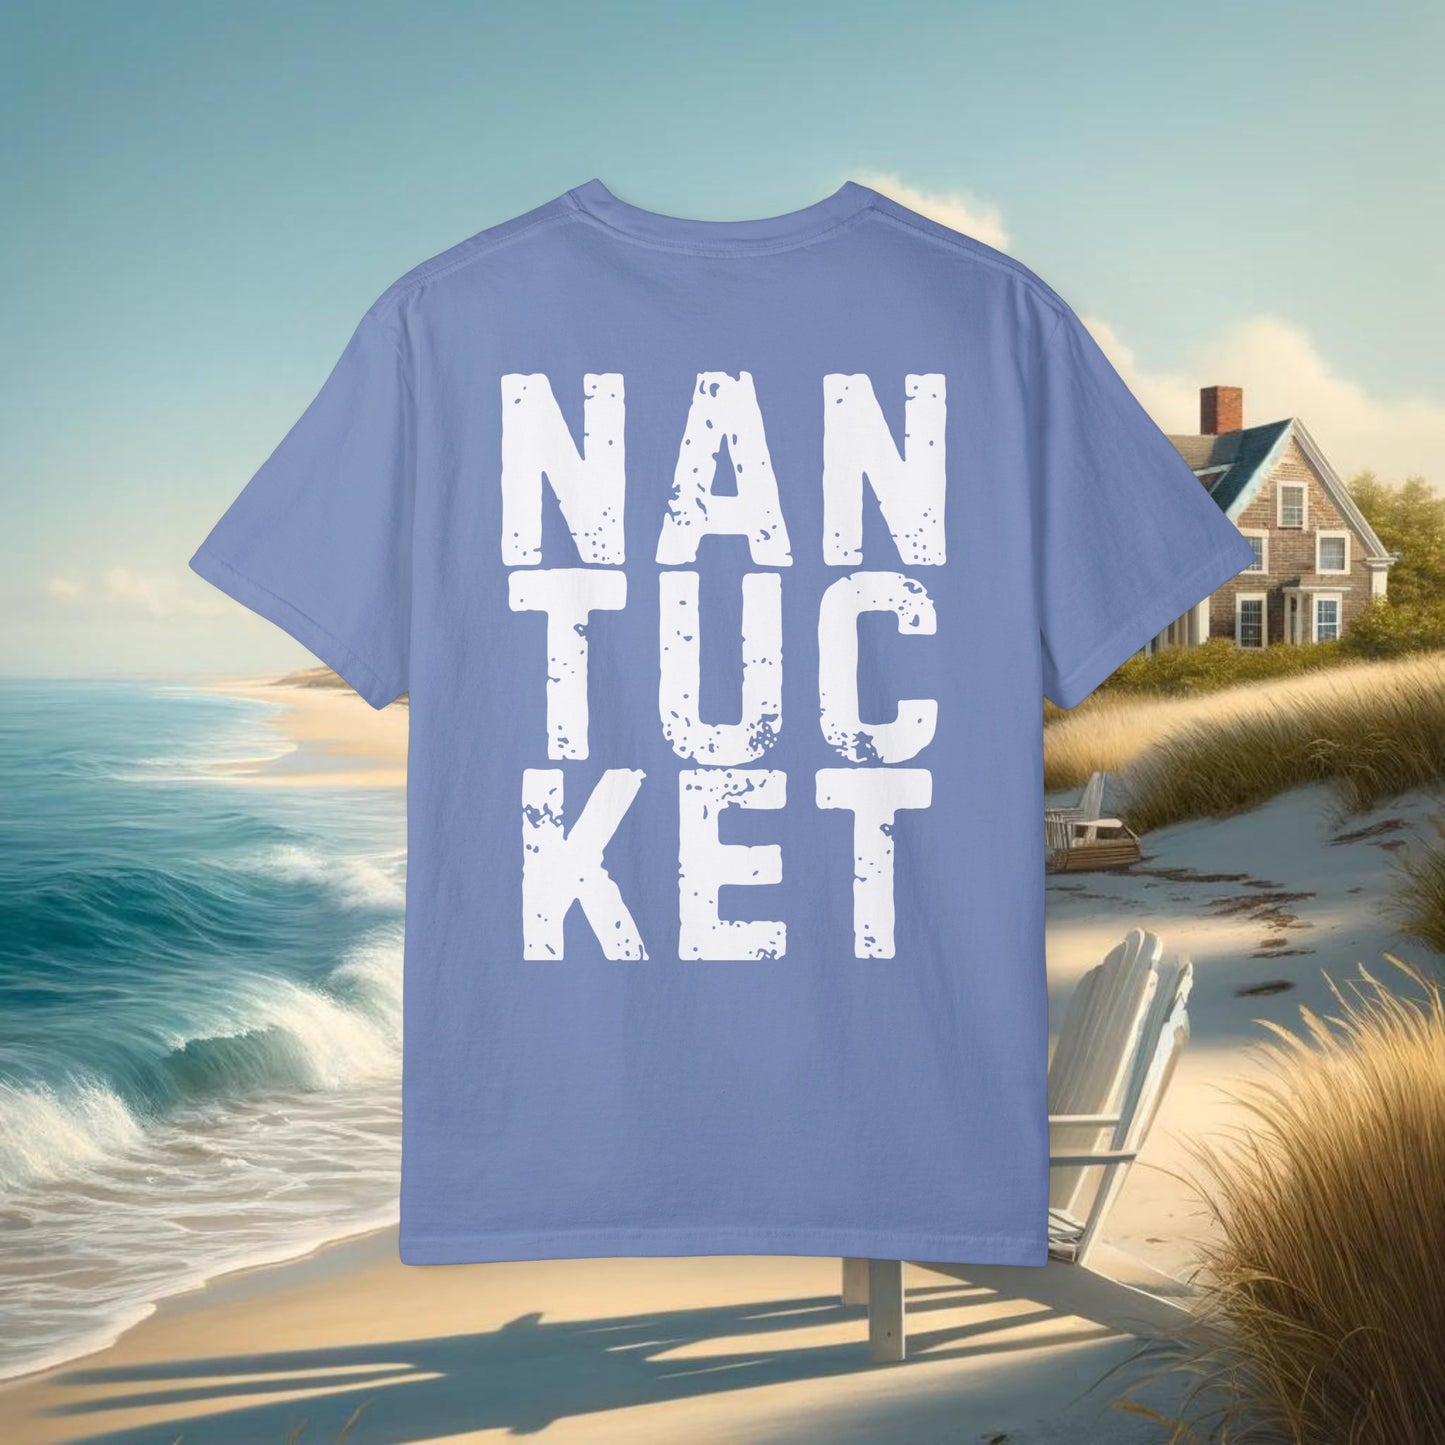 Nantucket Summer Vibes T-Shirt - Comfort Colors 1717, 100% Ring-Spun Cotton, Relaxed Fit